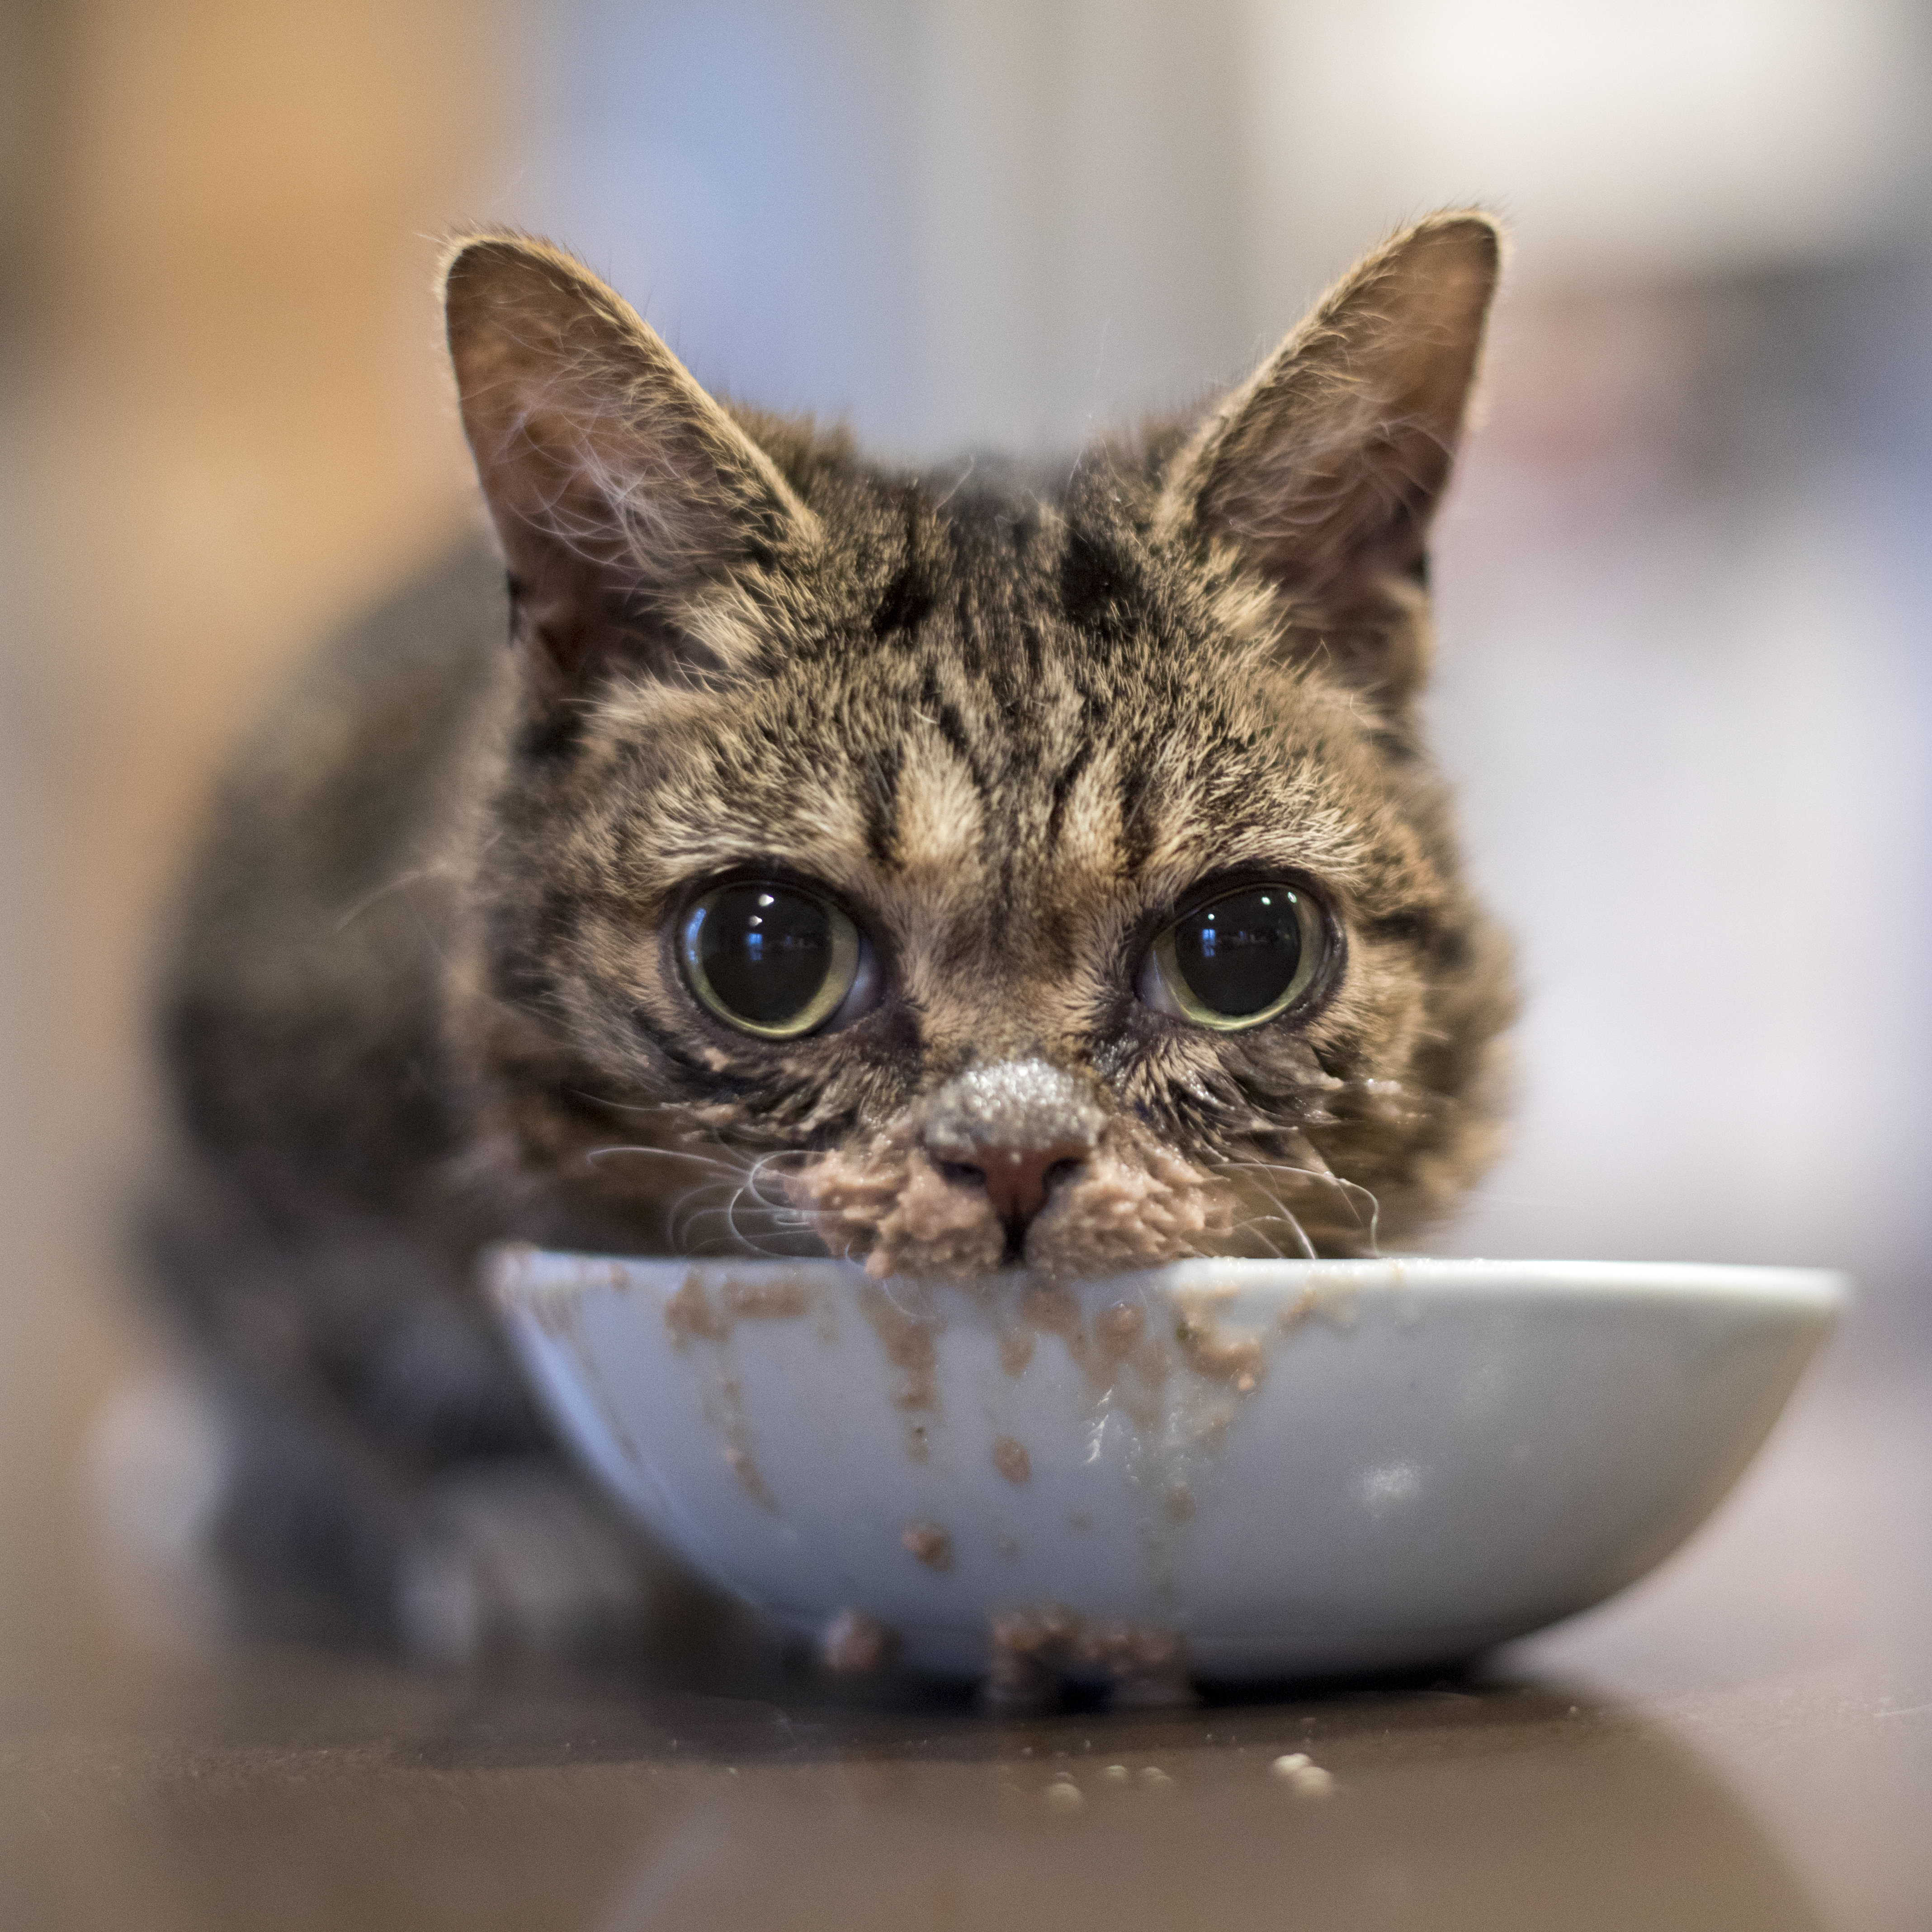 Lil BUB eating Halo wet cat food